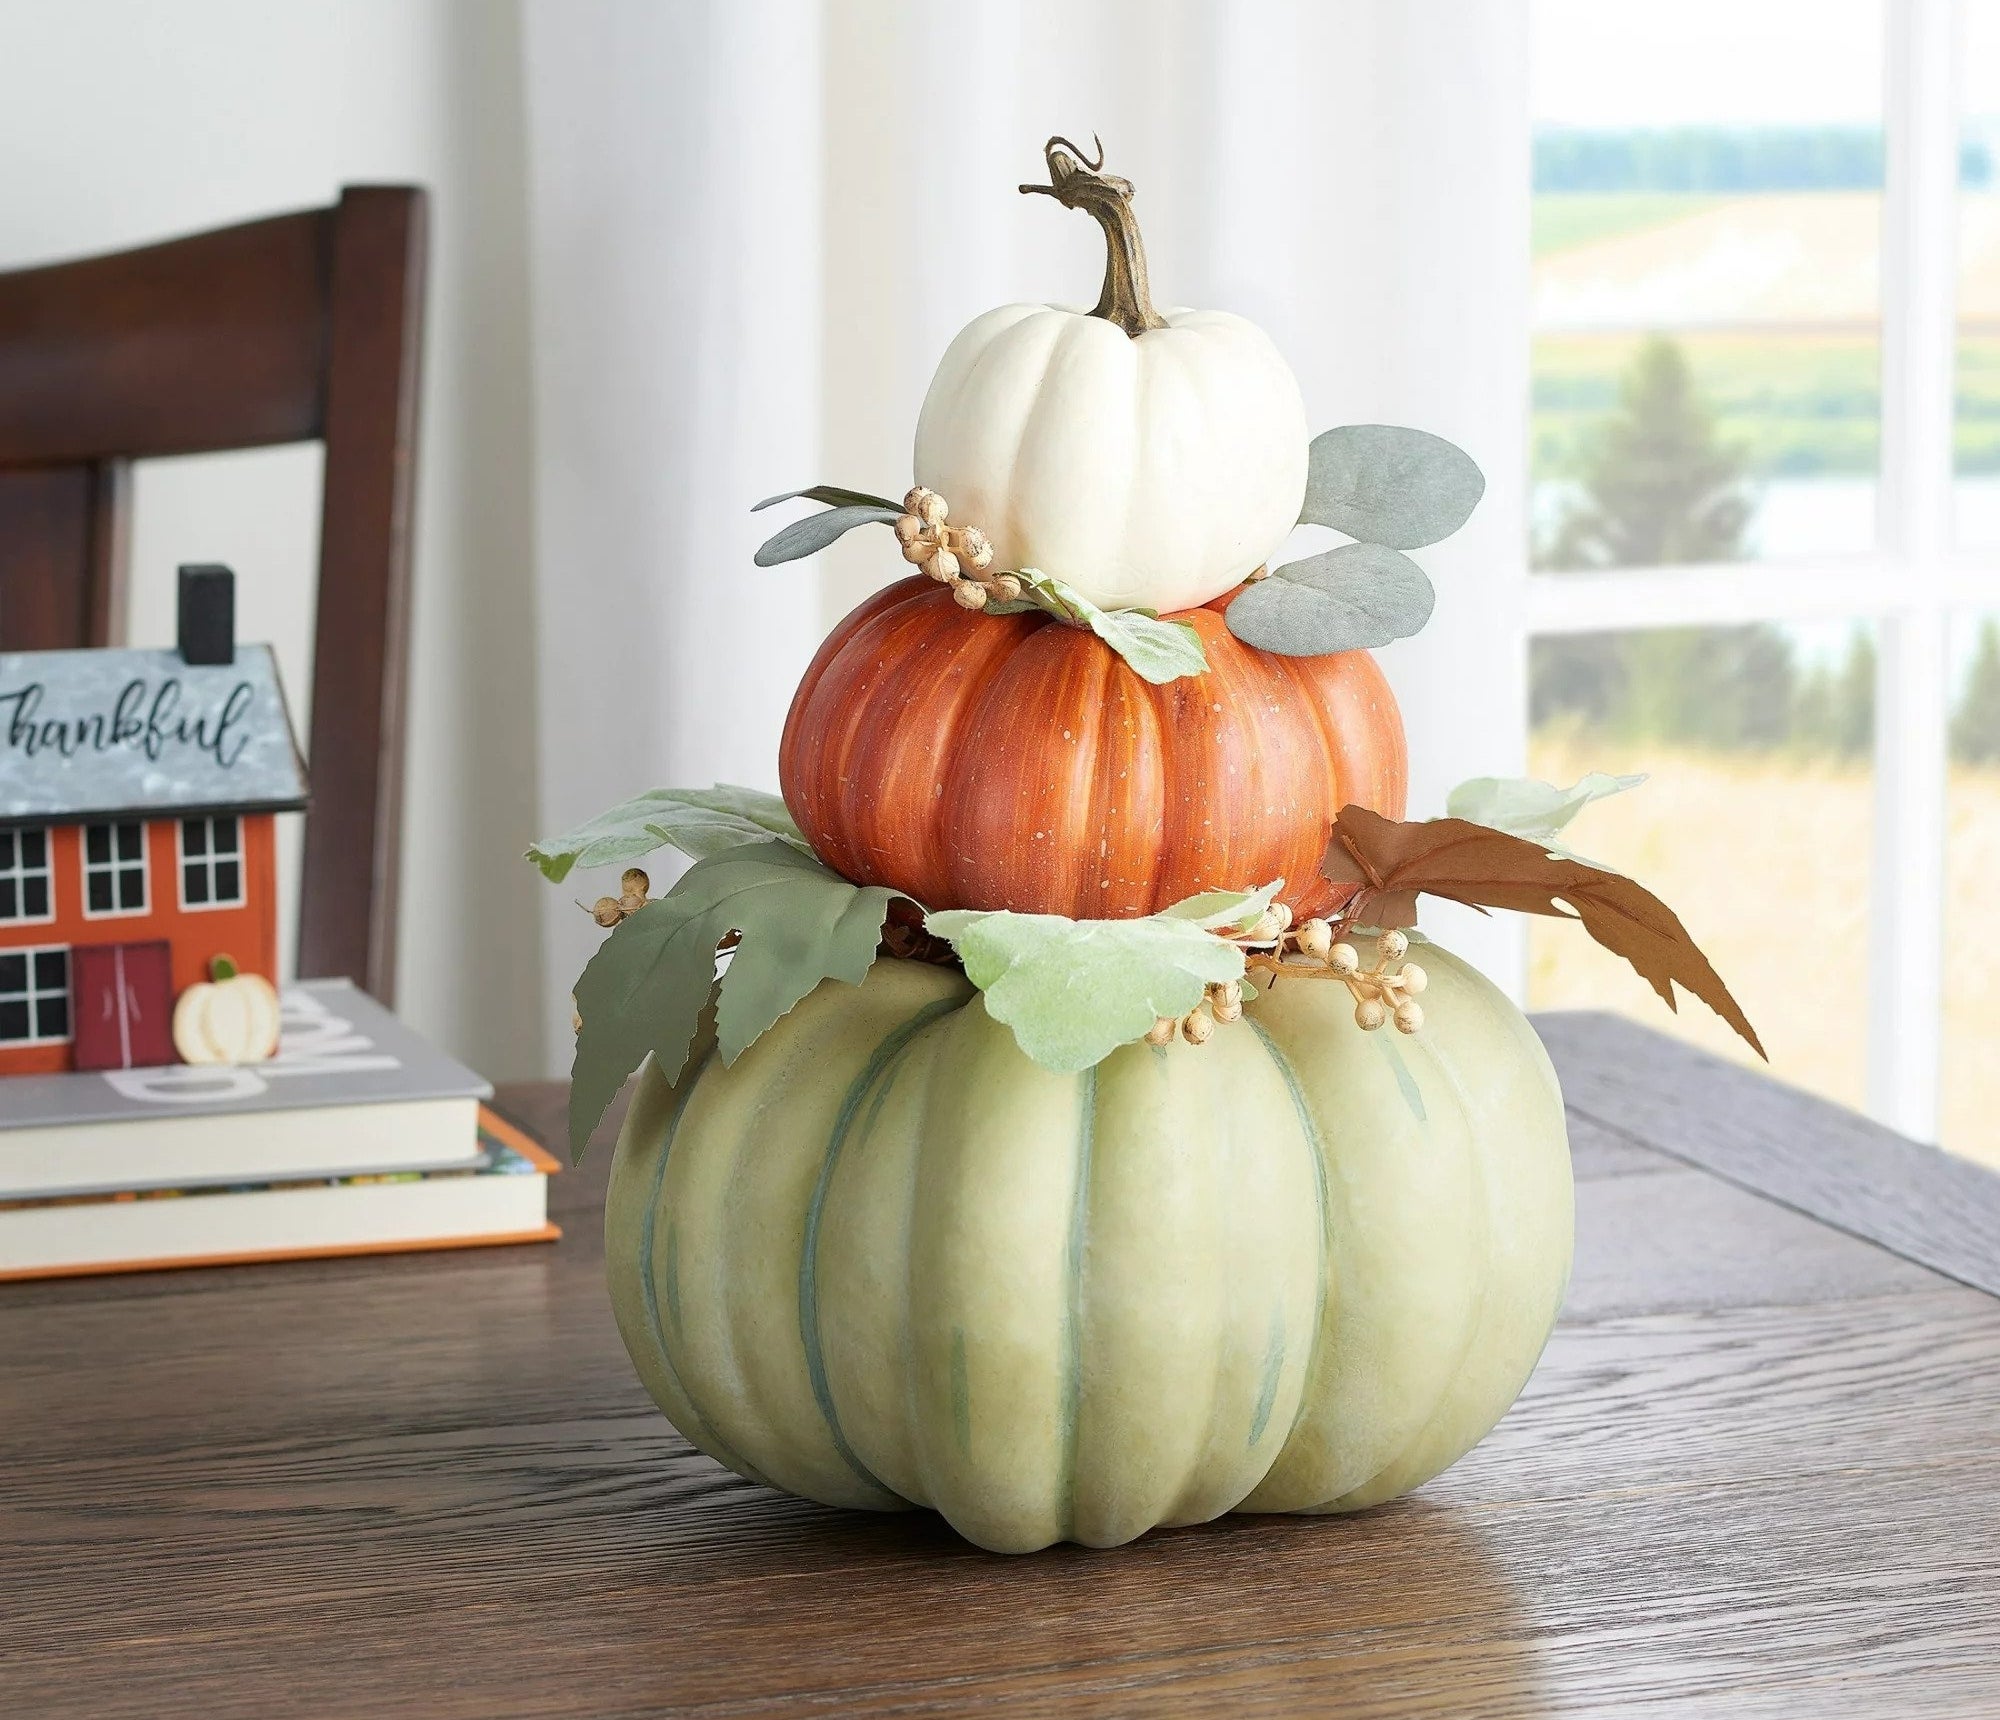 Three pumpkins stacked from smallest to largest in white, orange, and green respectively